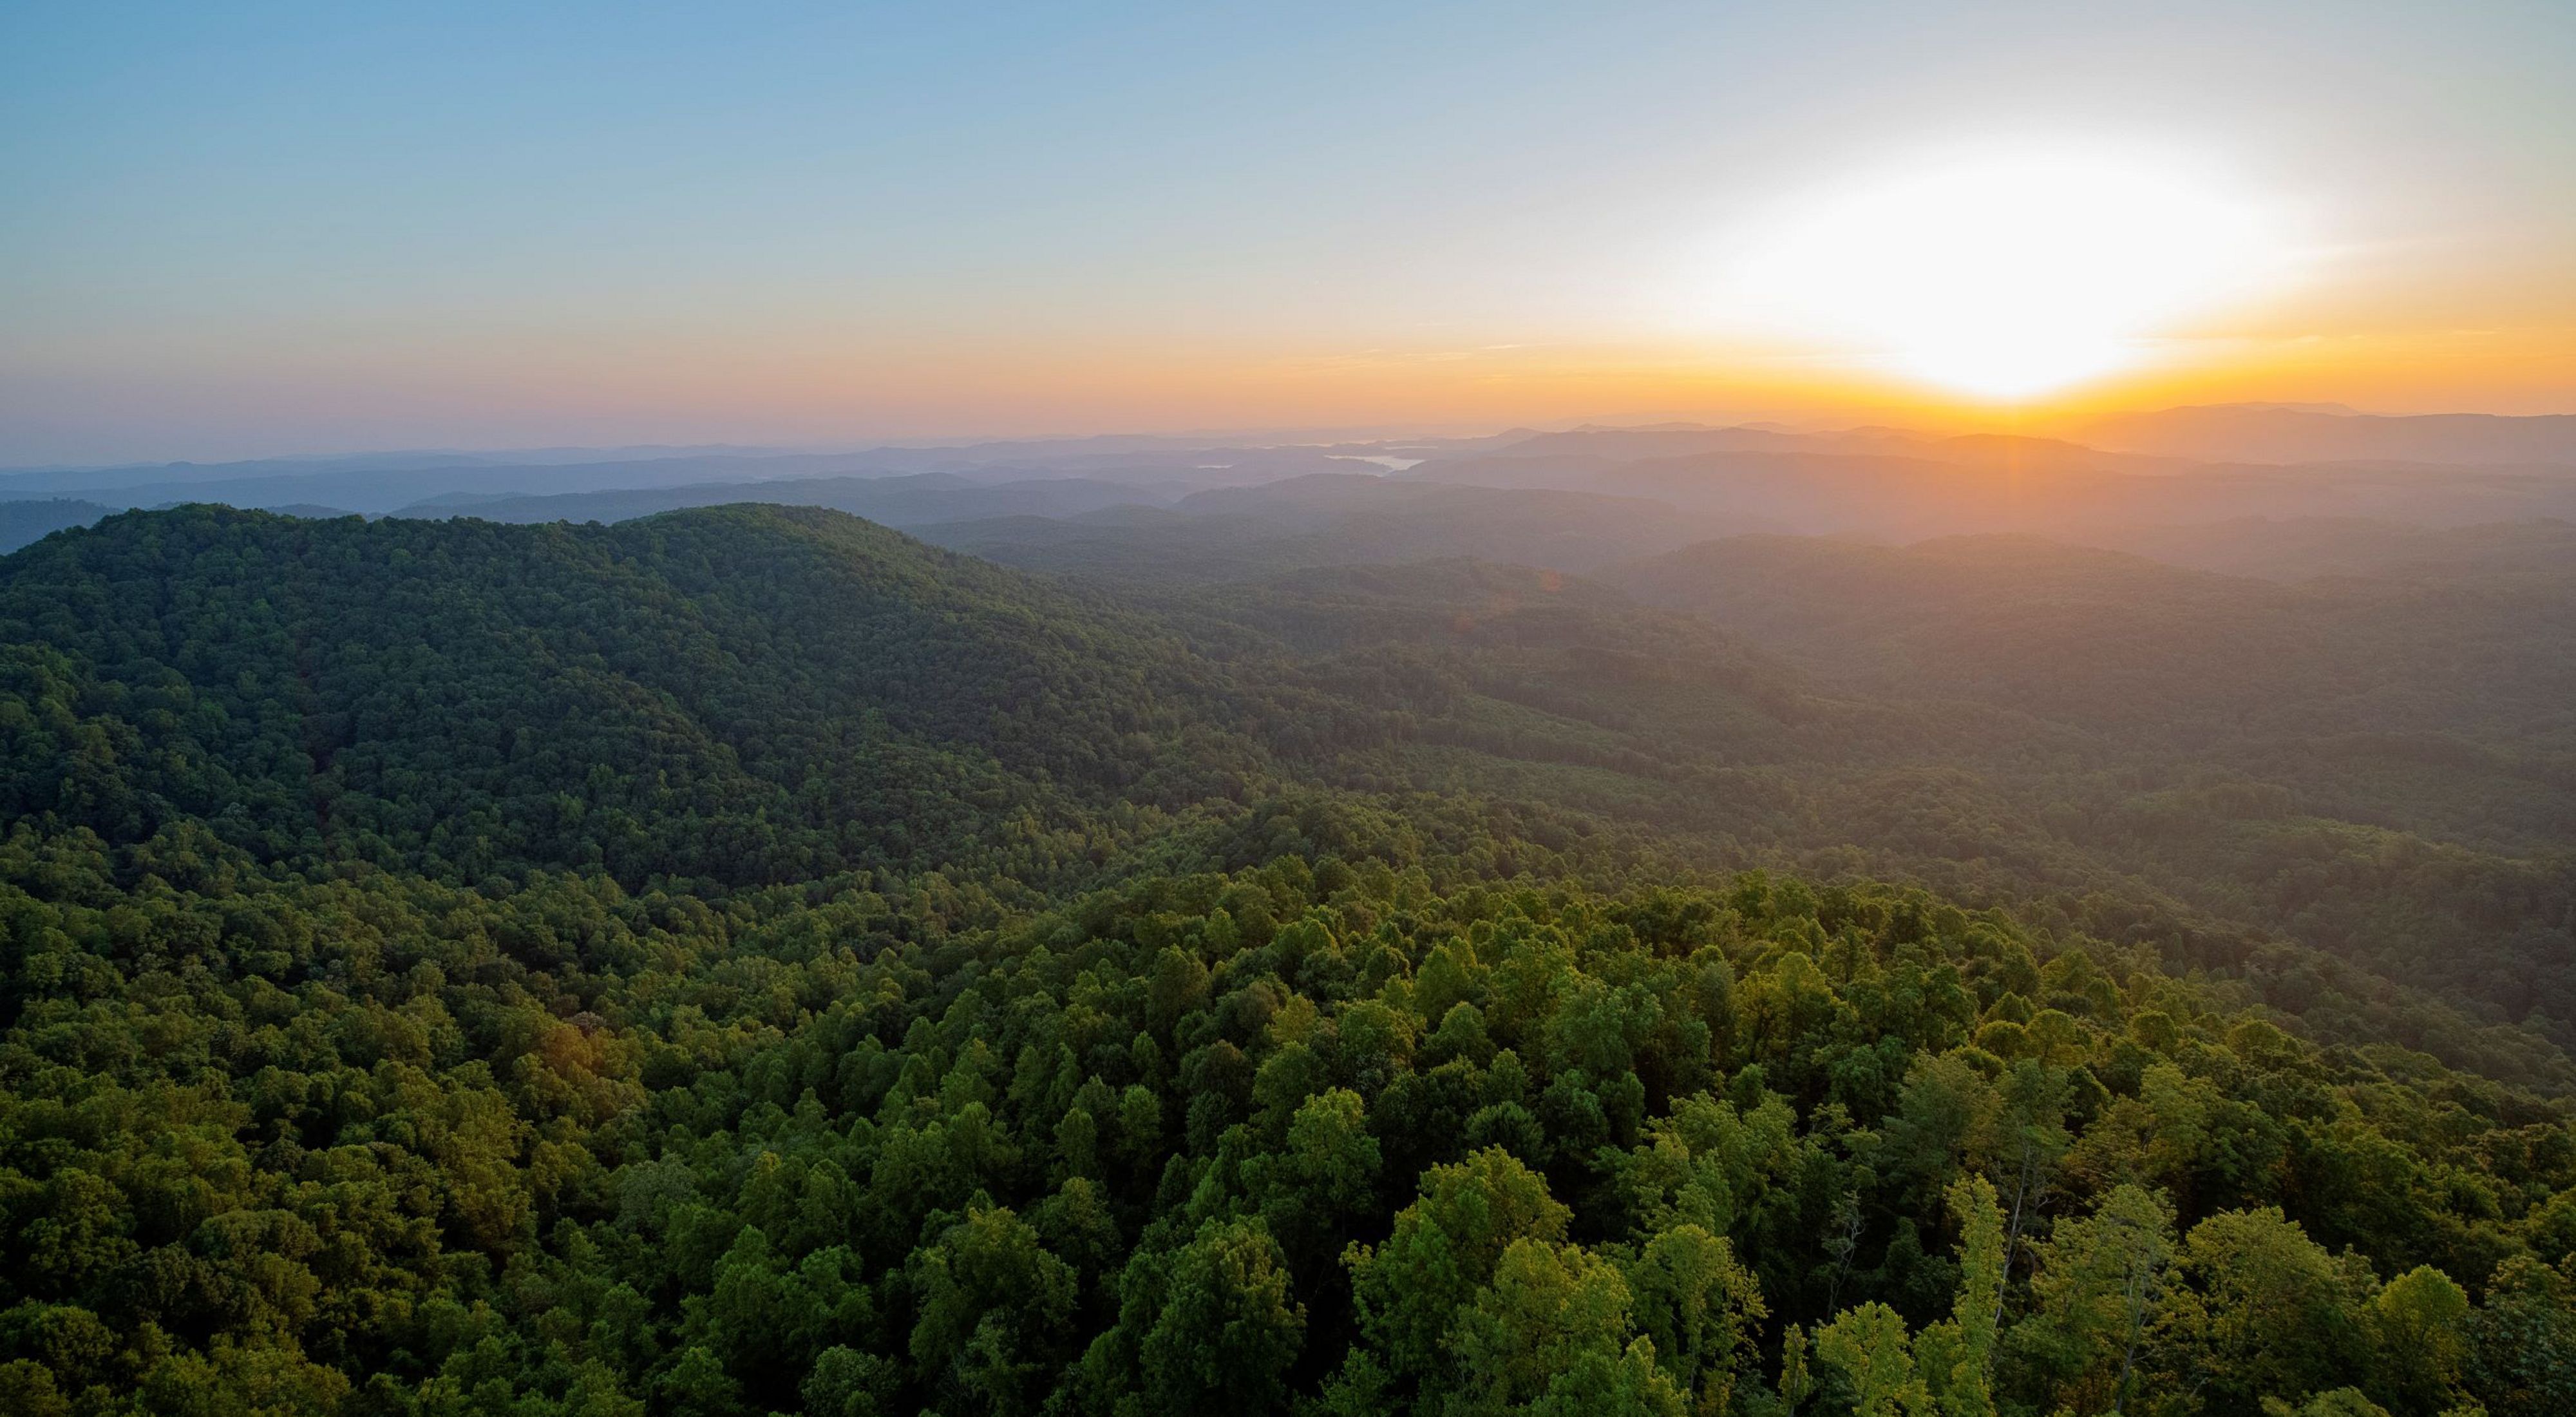 Sunrise over the forests of the Appalachian Mountains.